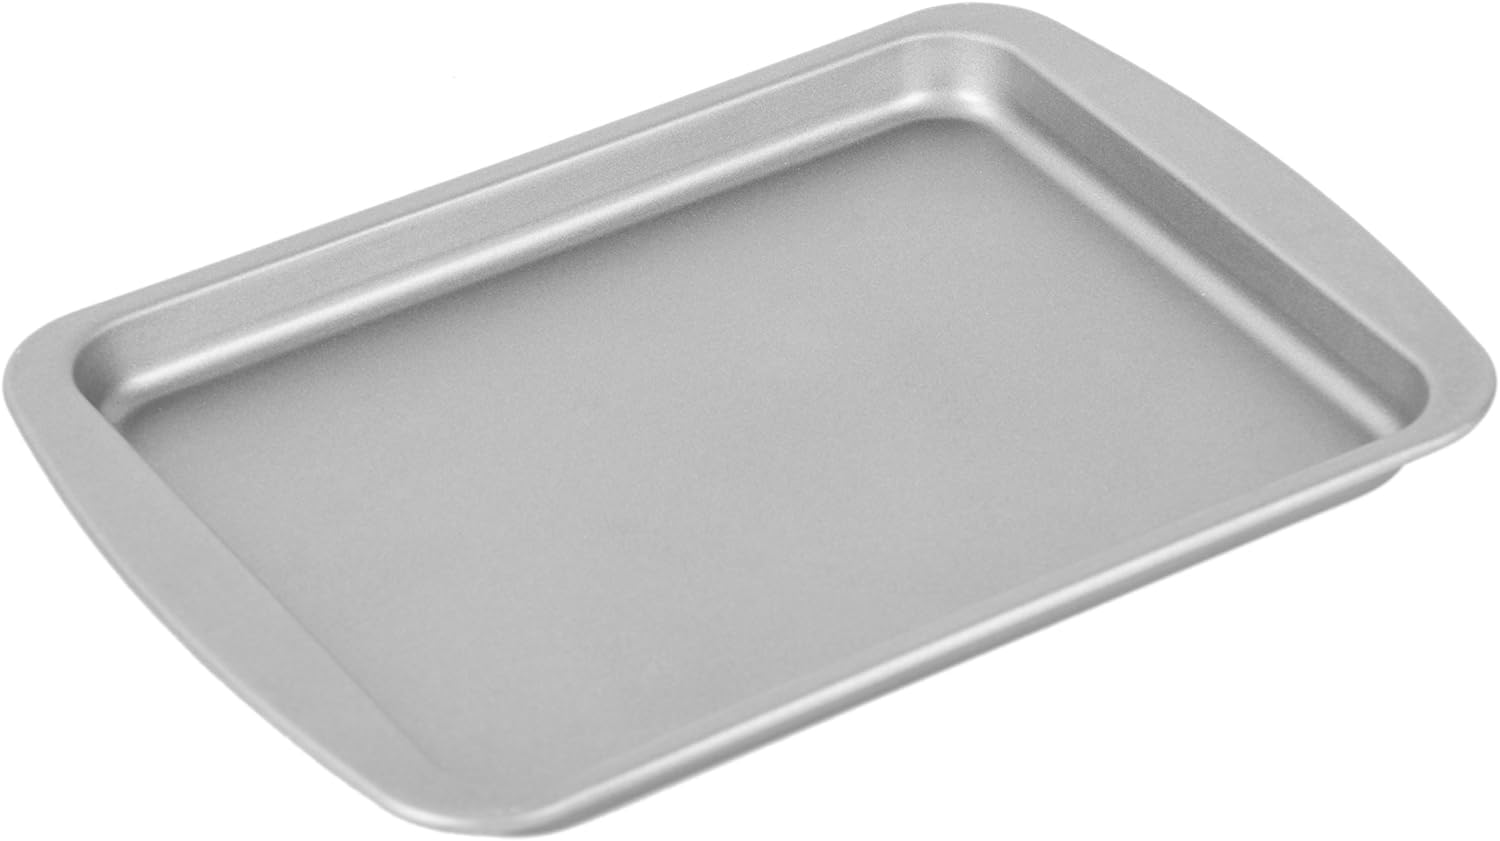 G & S Metal Products Company OvenStuff Nonstick Toaster Oven Cookie Pan, 8.5 inches by 6.5 inches